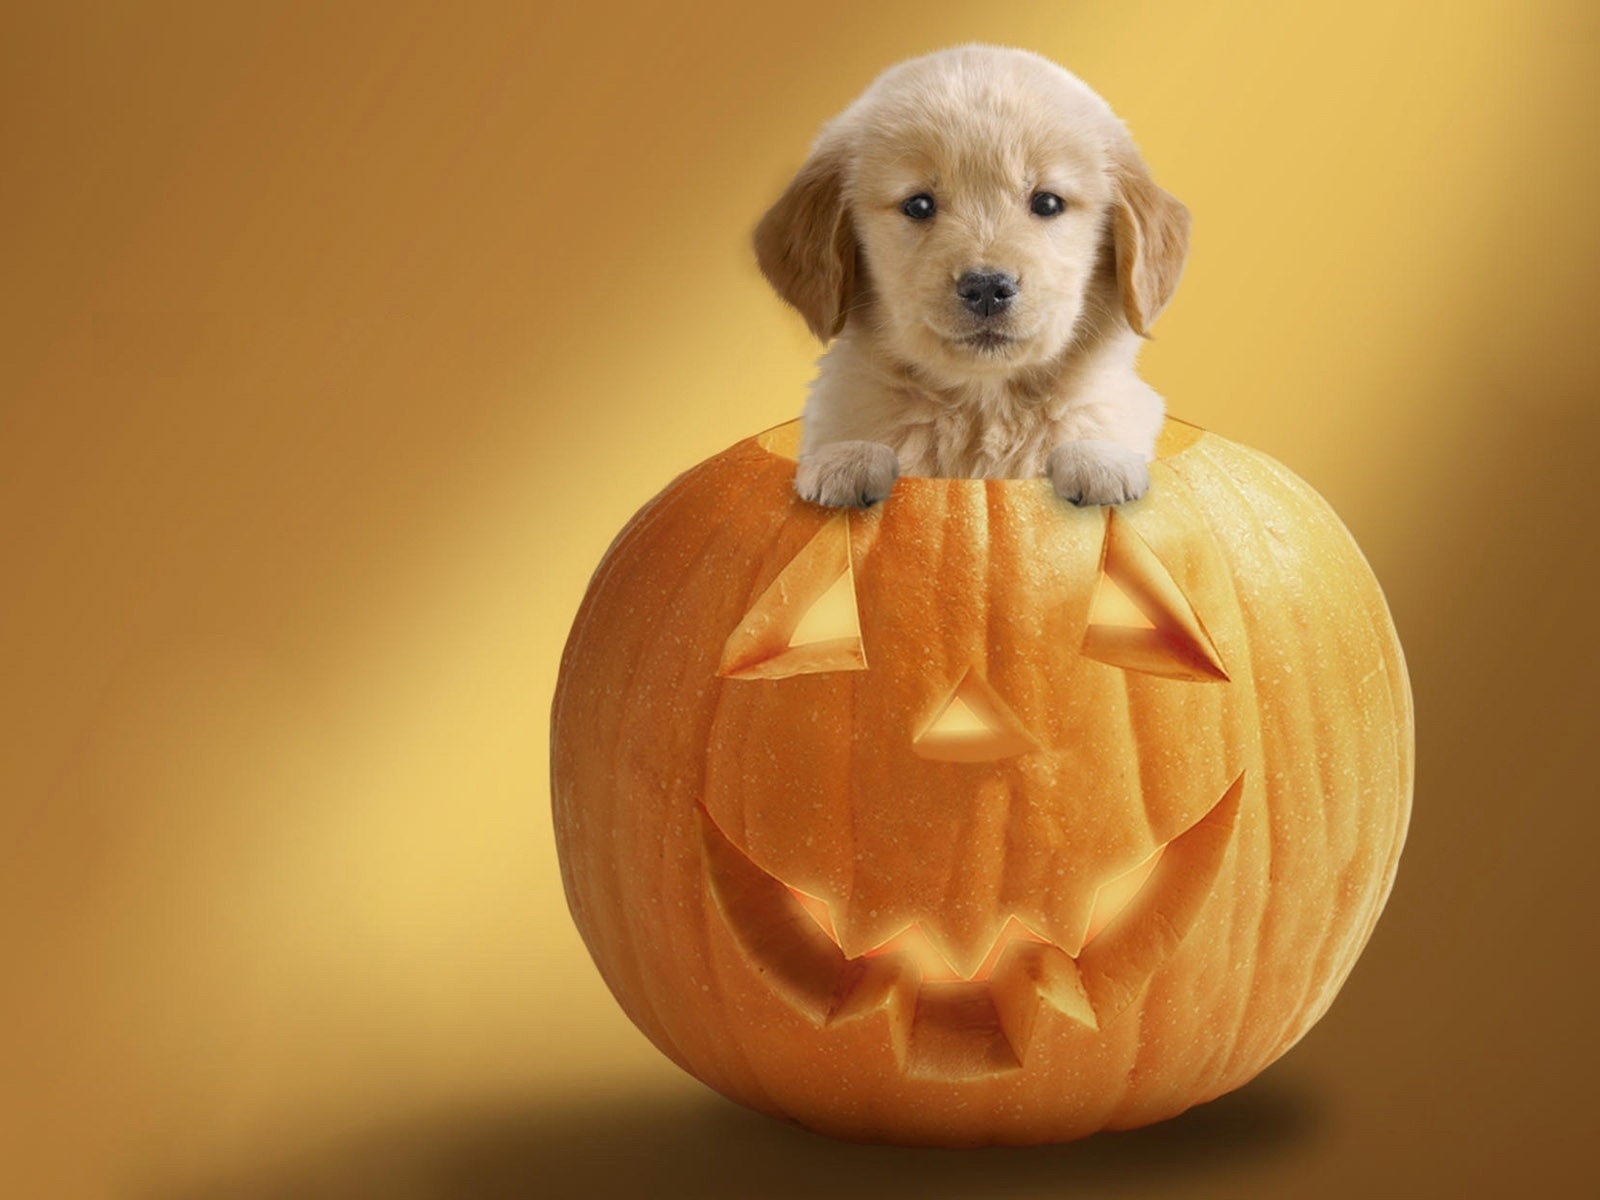 Dog Ready For Halloween for 1600 x 1200 resolution